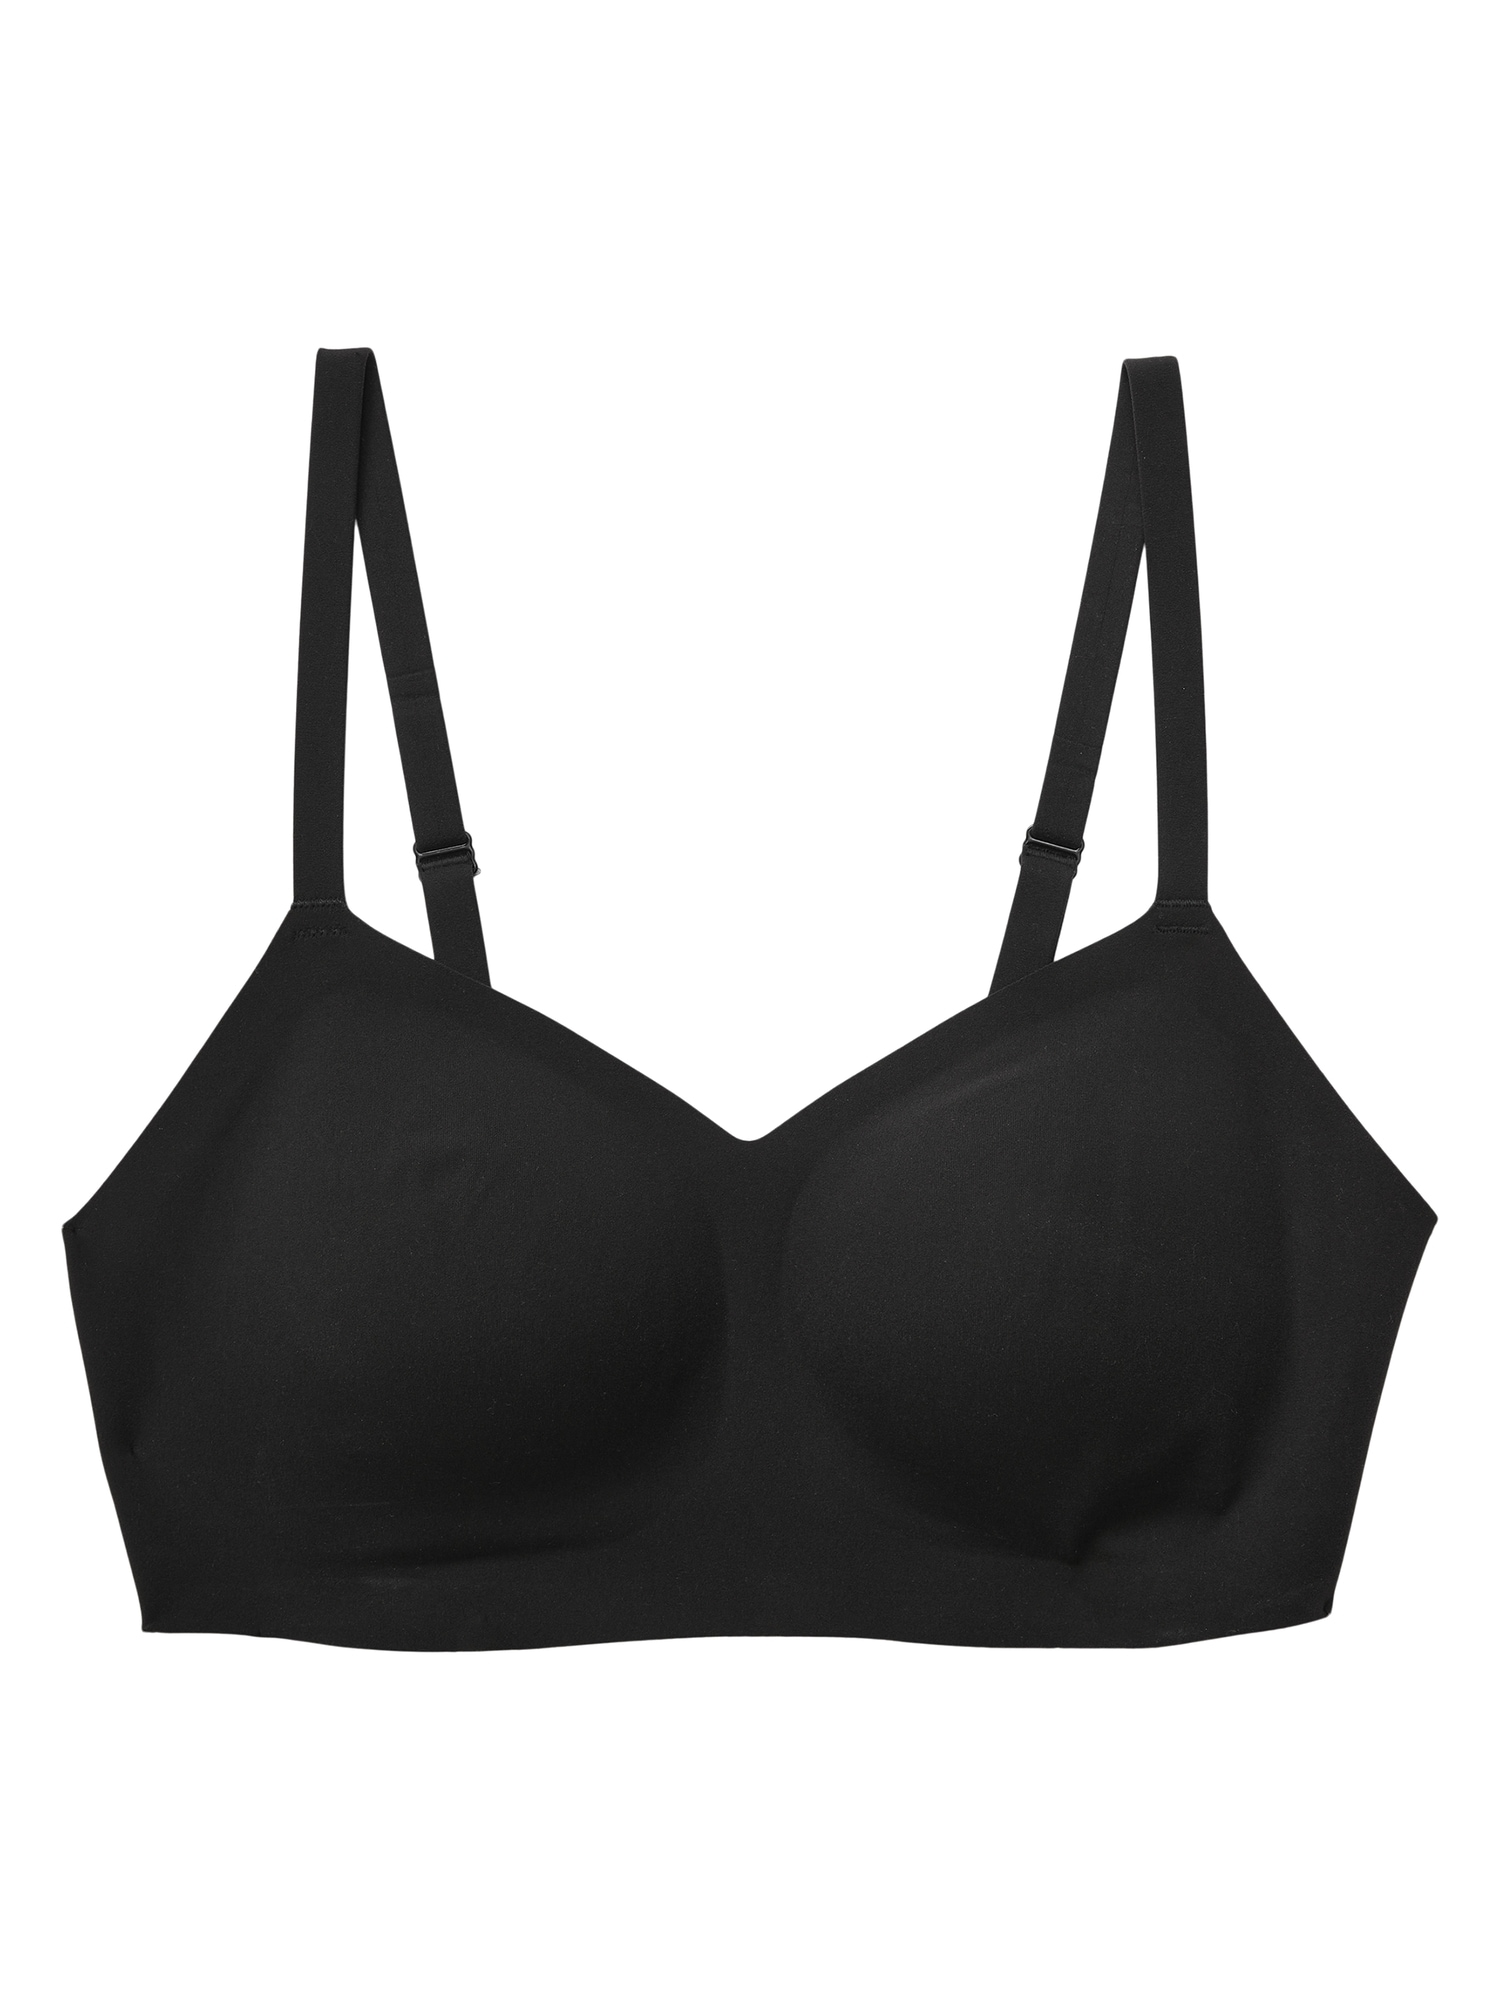 Padded Athletic Bra - Black with dots